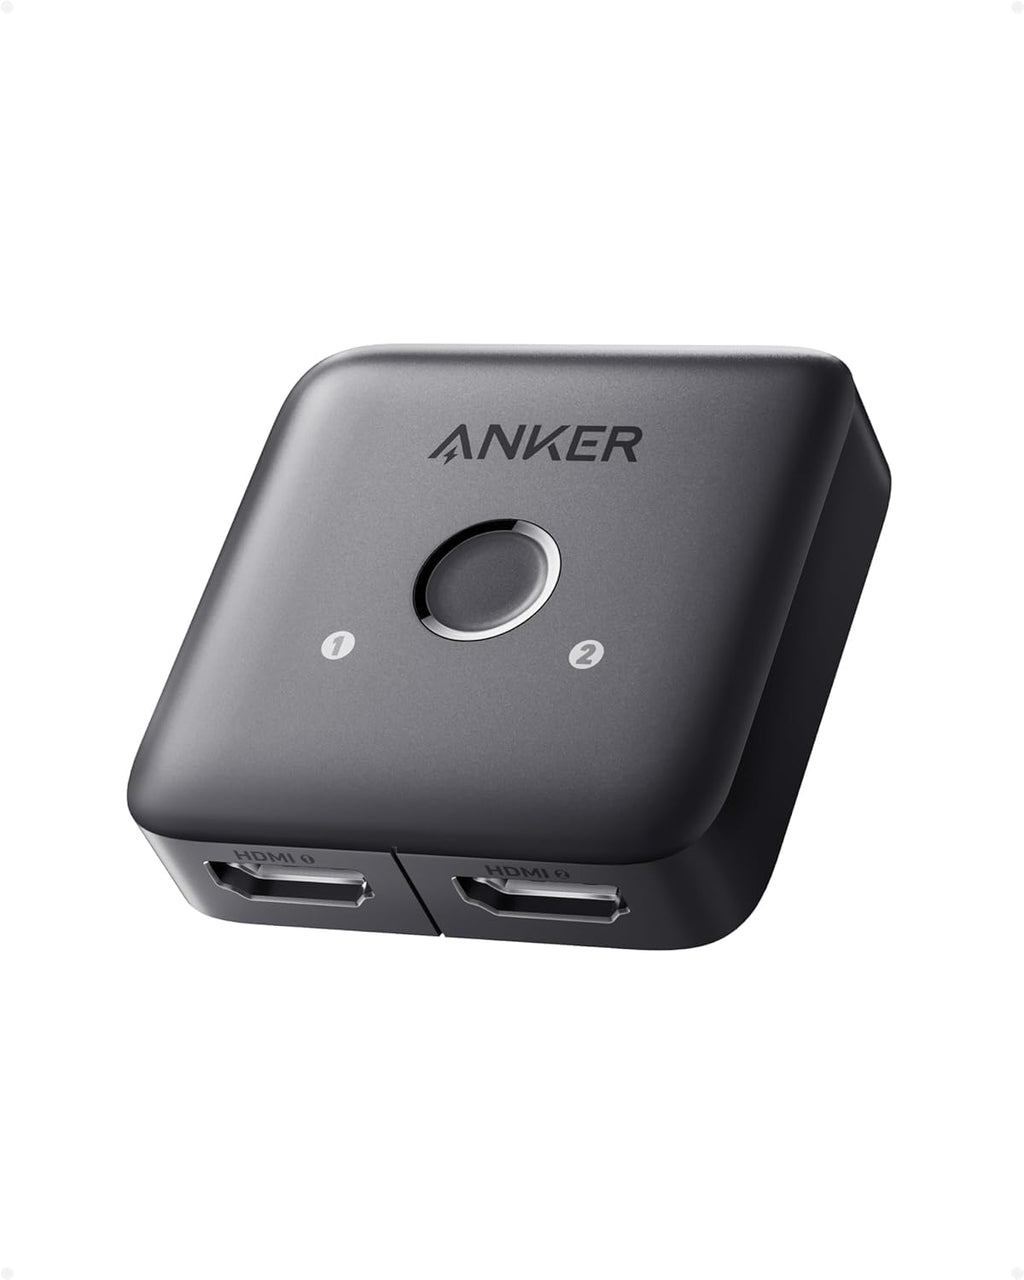 Anker HDMI Switch, 4K@60Hz Bi-Directional HDMI Switcher, 2 in 1 Out with Smooth Finish, Supports HDR, 3D, Dolby, Compatible with Laptops, PC, Xbox Series, PS5 / PS4, Projector, and More 2-in-1